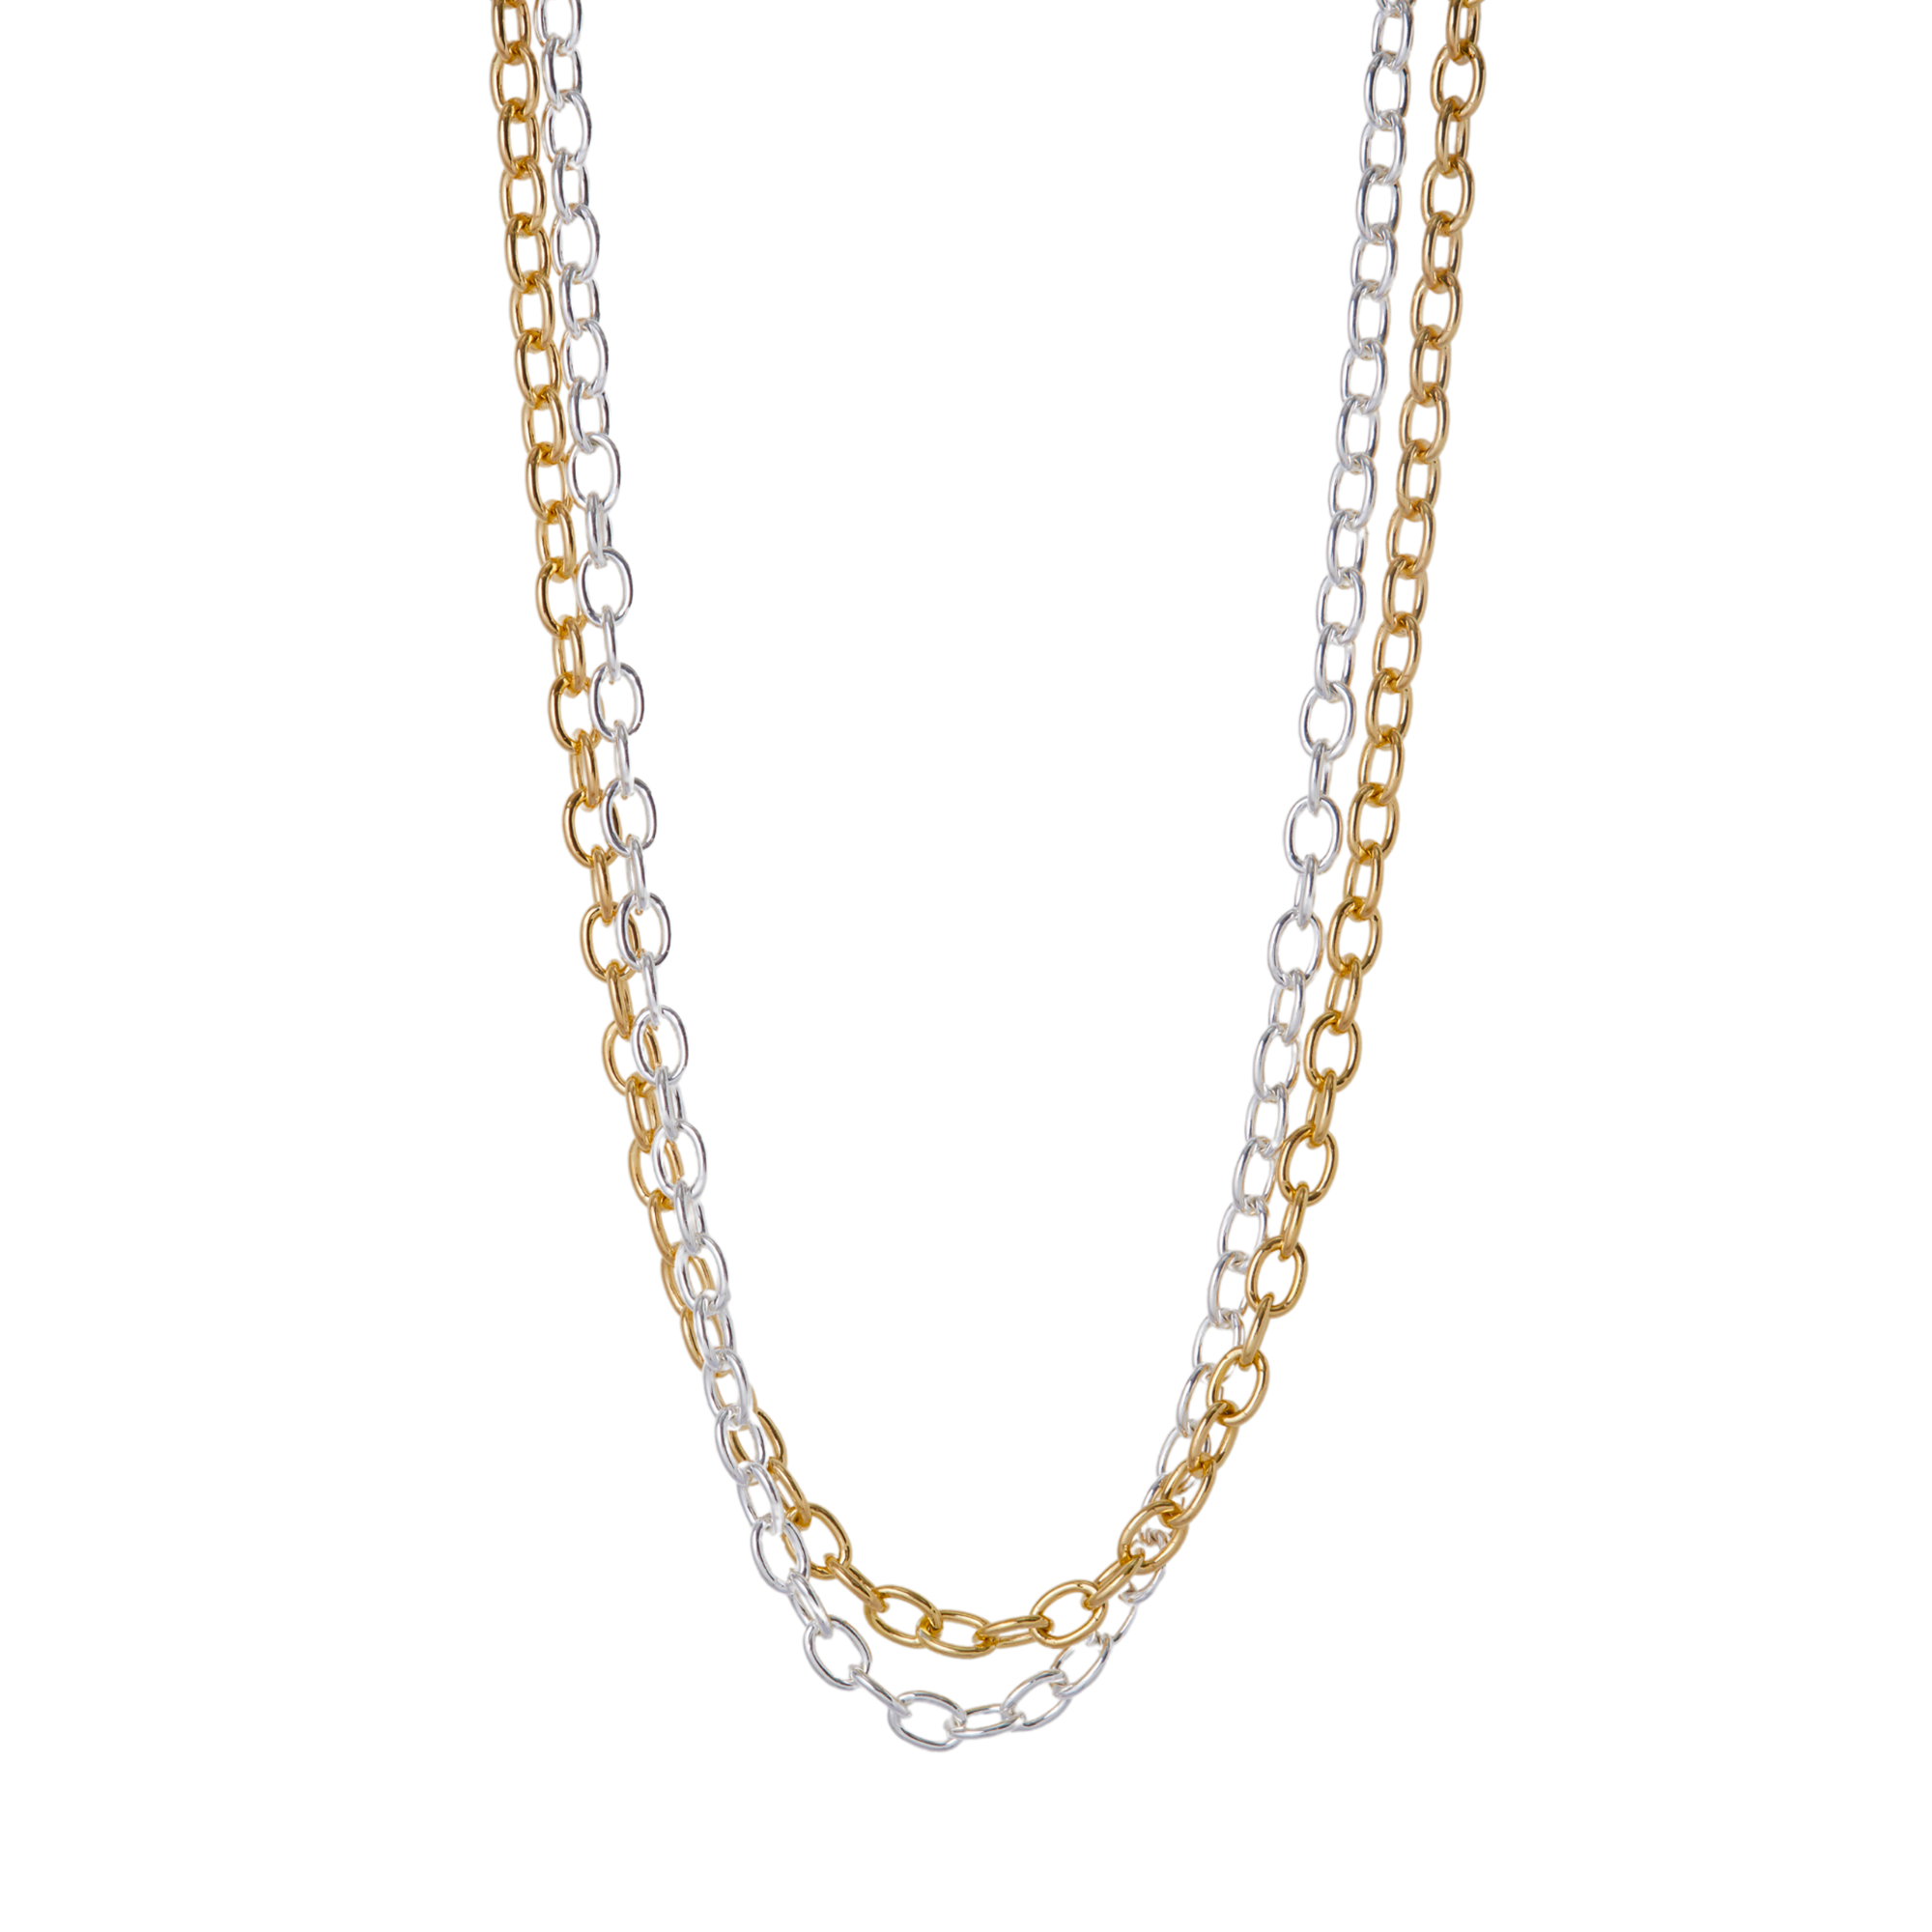 THE TWO TONE OVAL CHAIN NECKLACE